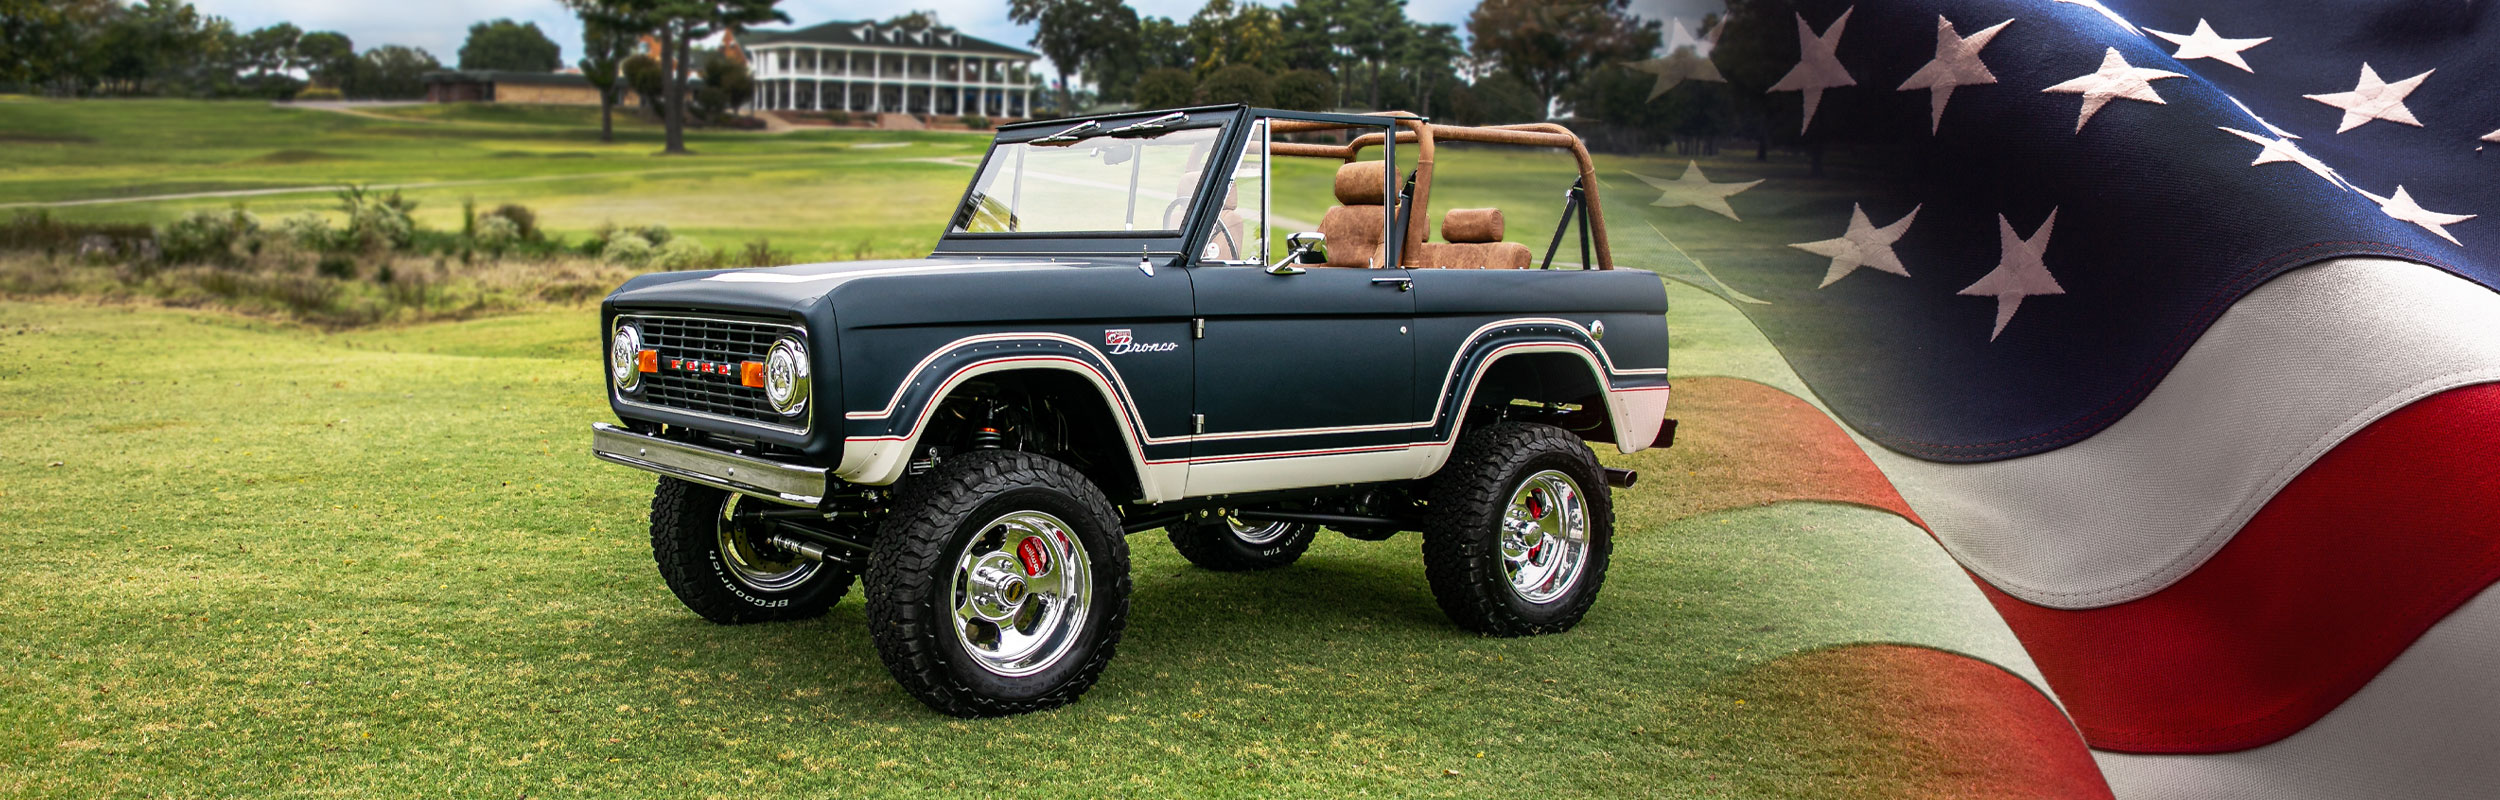 Ford Bronco® and American Flag